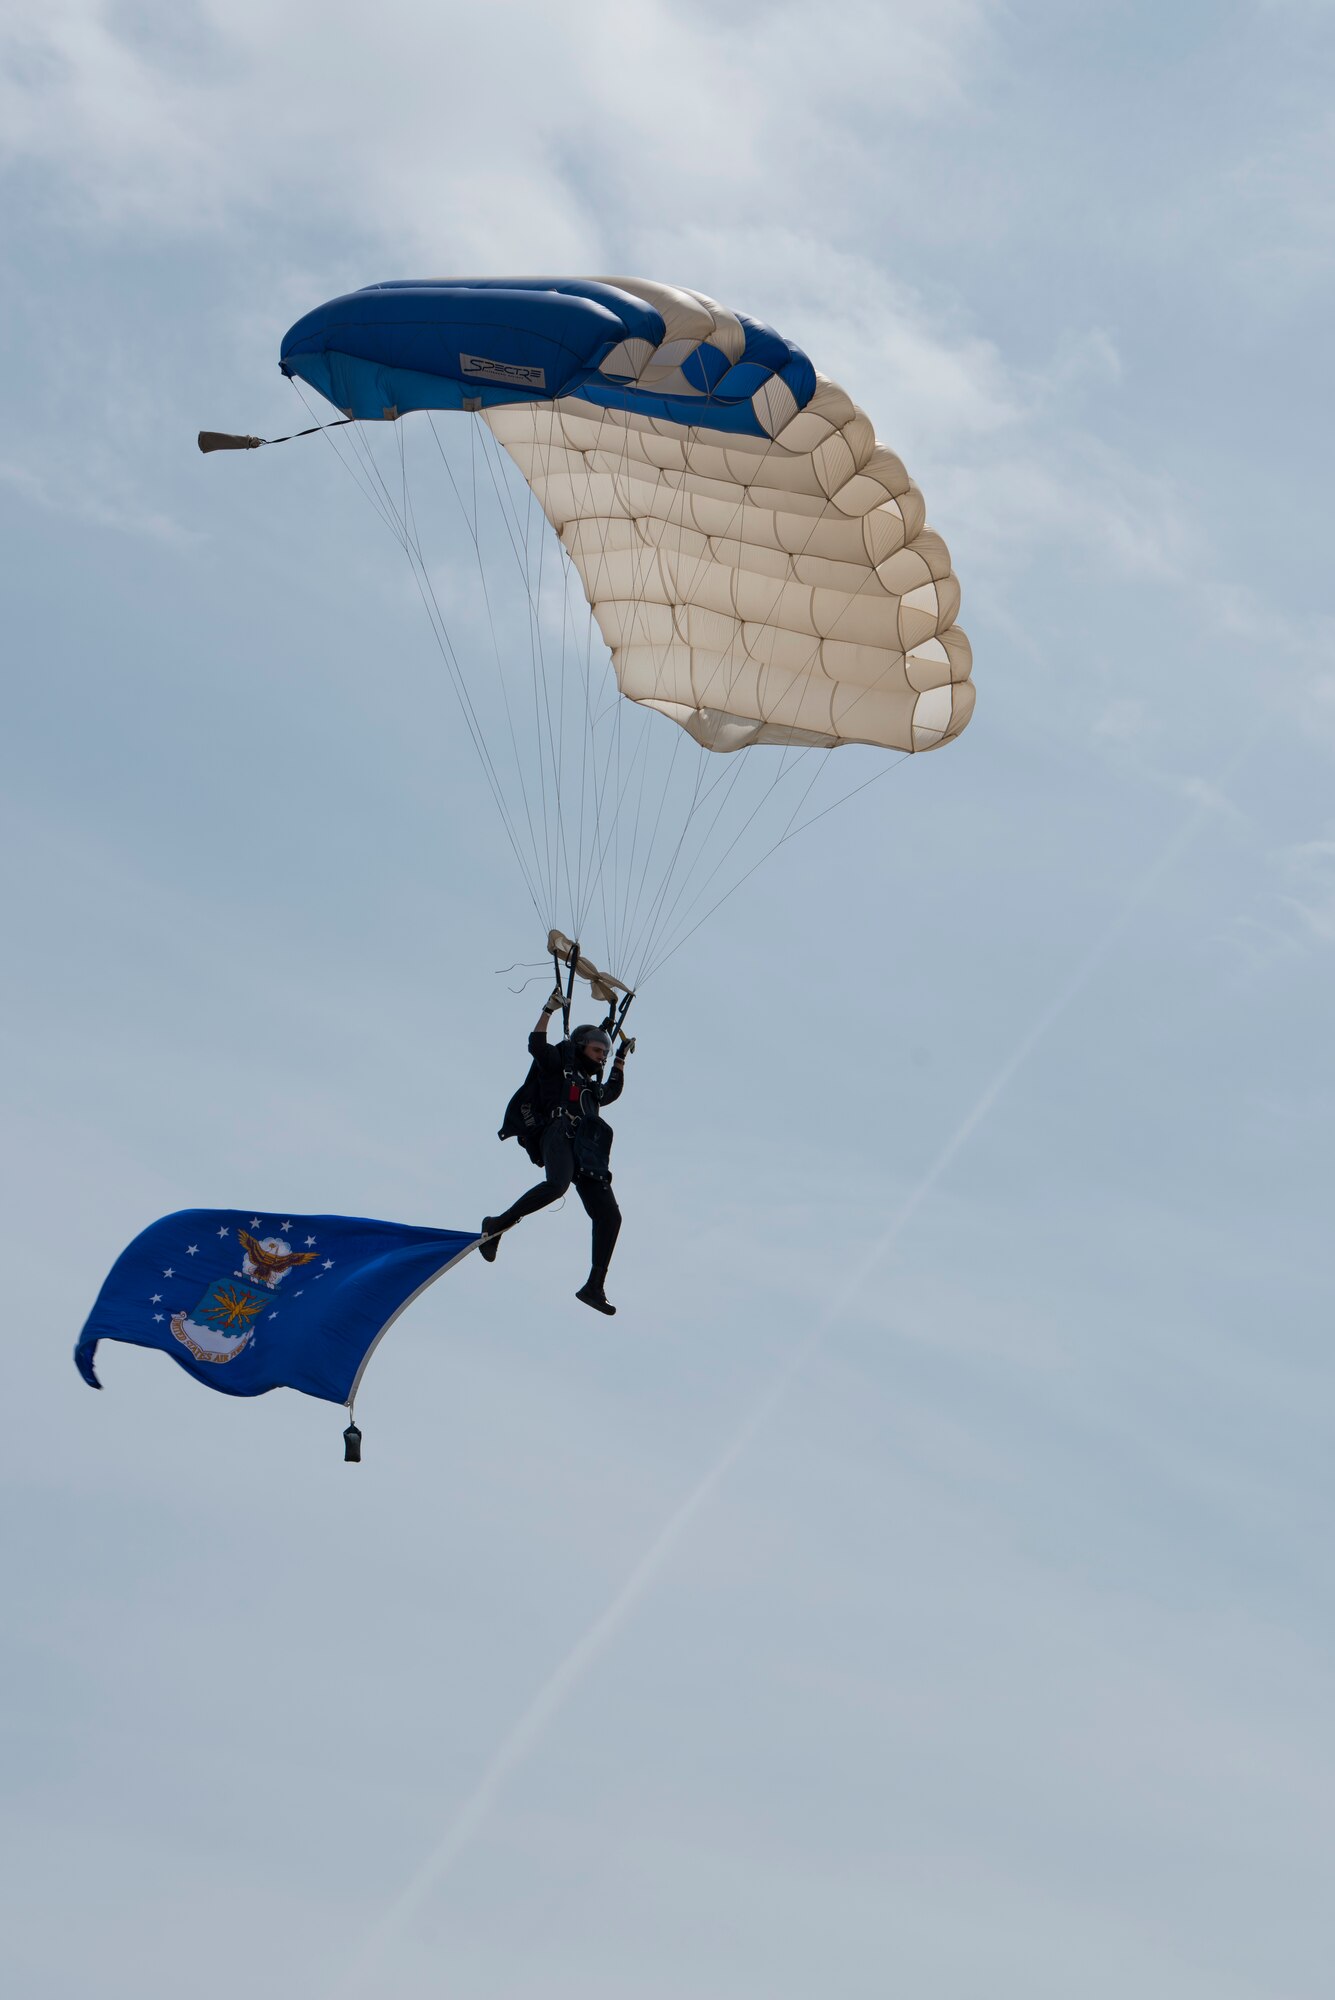 A U.S. Air Force Academy Wings of Blue parajumper glides in the flight line center stage while trailing the U.S. Air Force flag during the 2019 Skyfest Open House and Air Show at Fairchild Air Force Base, Washington, June 22, 2019. Skyfest 2019 offered a unique view of Team Fairchild’s role in enabling Rapid Global Mobility for the U.S. Air Force. The show featured more than 13 aerial acts and 16 static display aircraft, as well as other attractions and displays. (U.S. Air Force photo by Senior Airman Ryan Lackey)